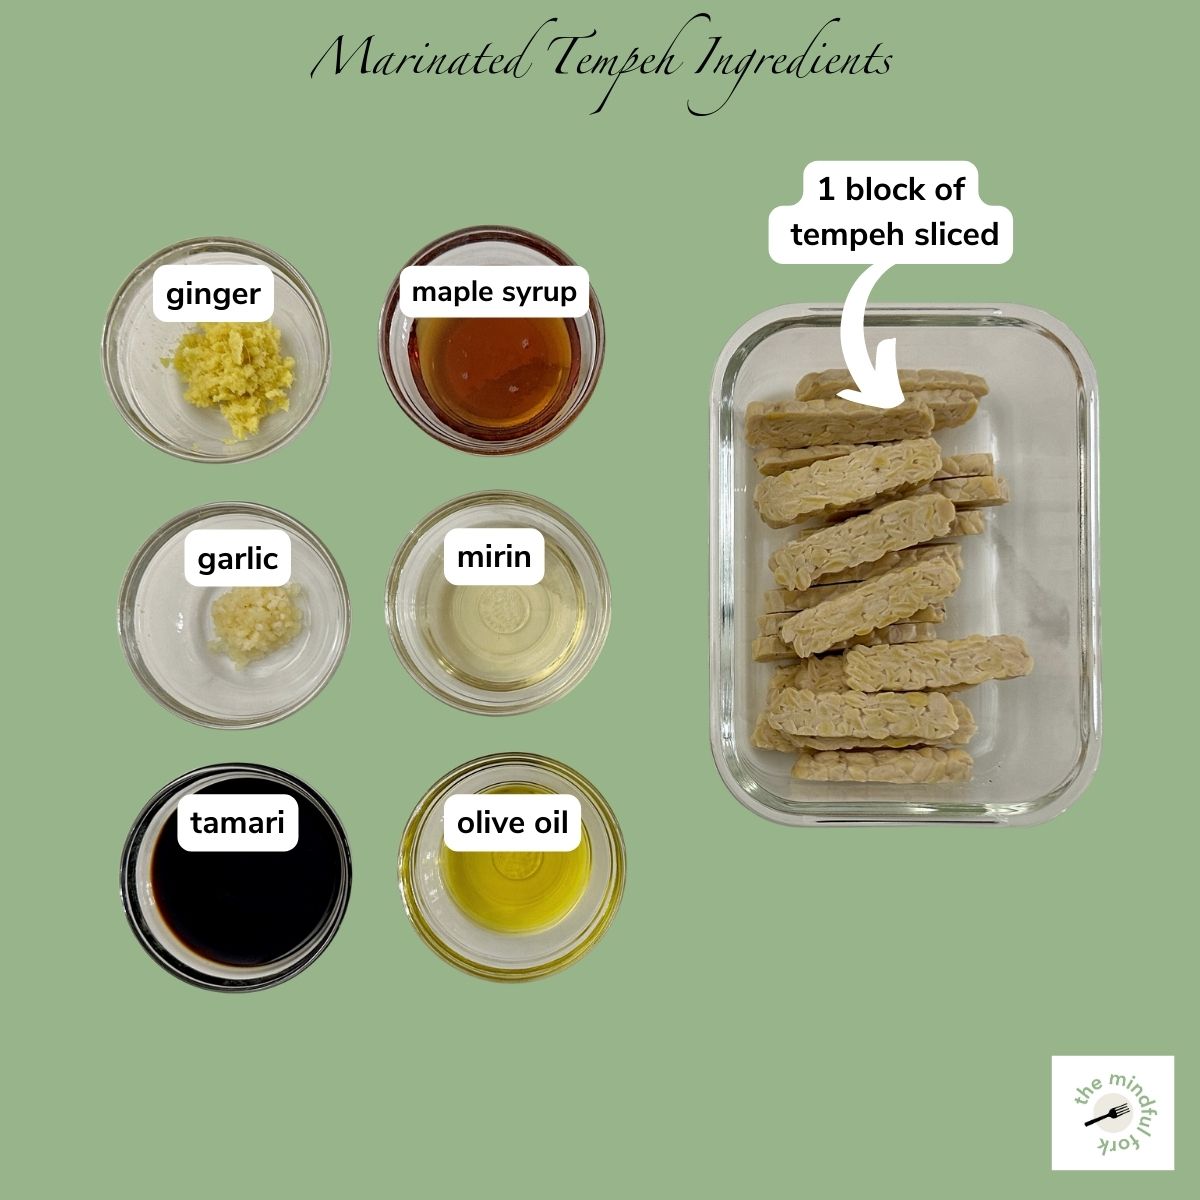 Ingredients to make roasted tempeh with a simple marinade.